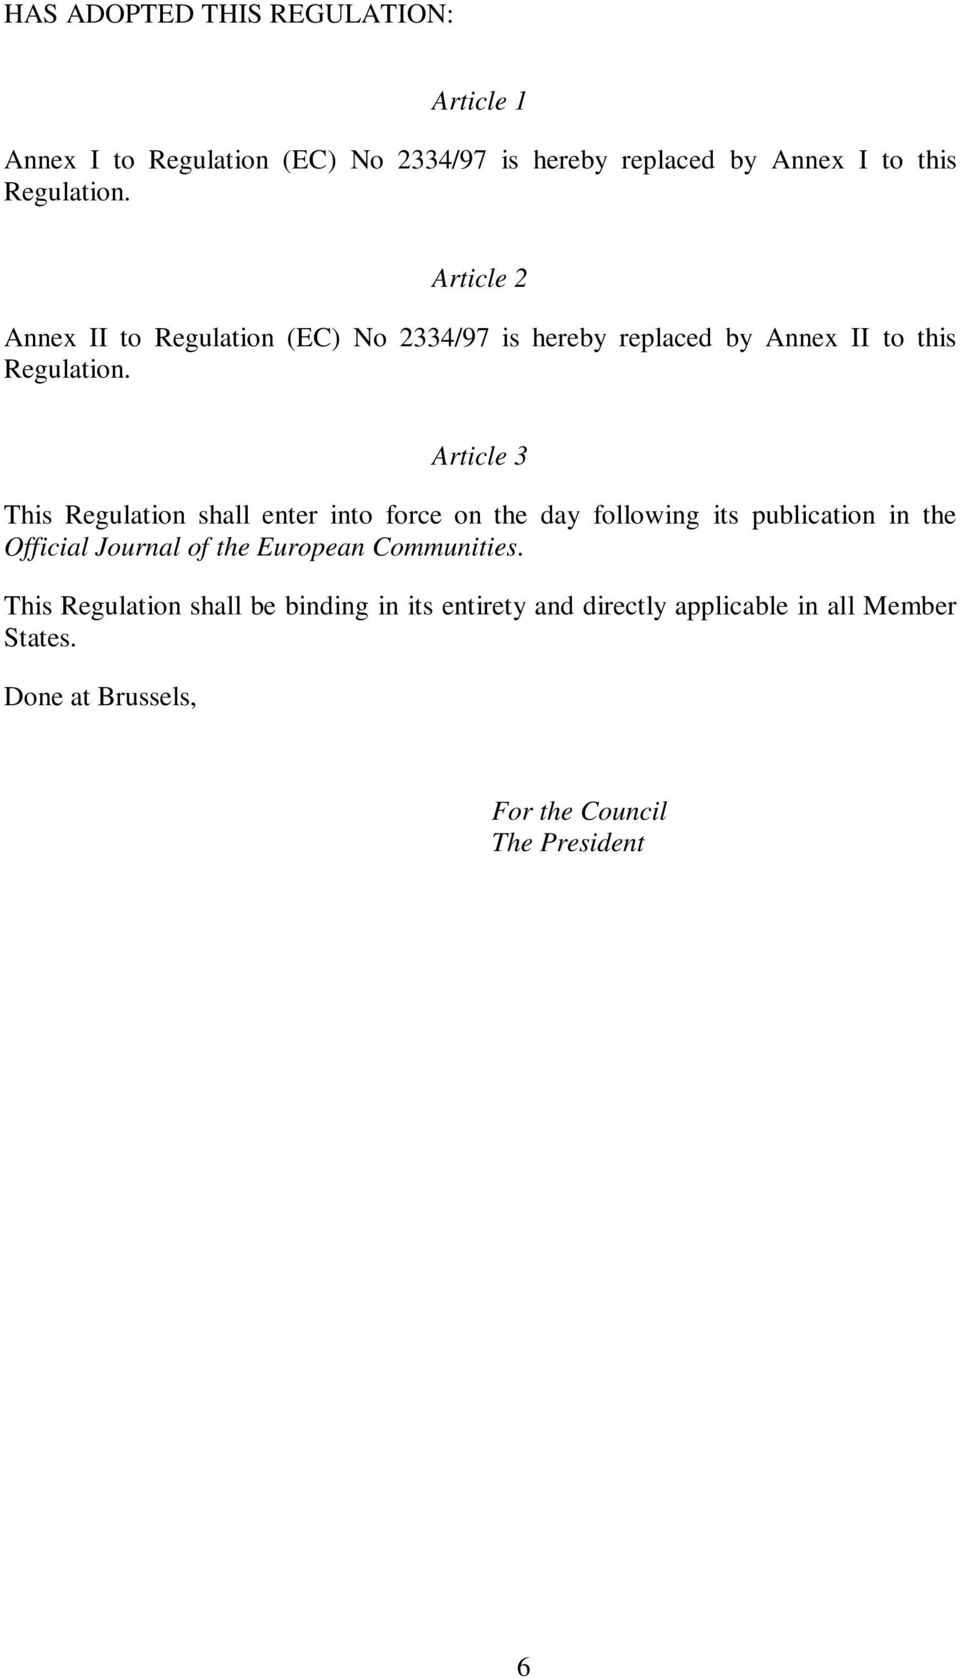 Article 3 This Regulation shall enter into force on the day following its publication in the Official Journal of the European